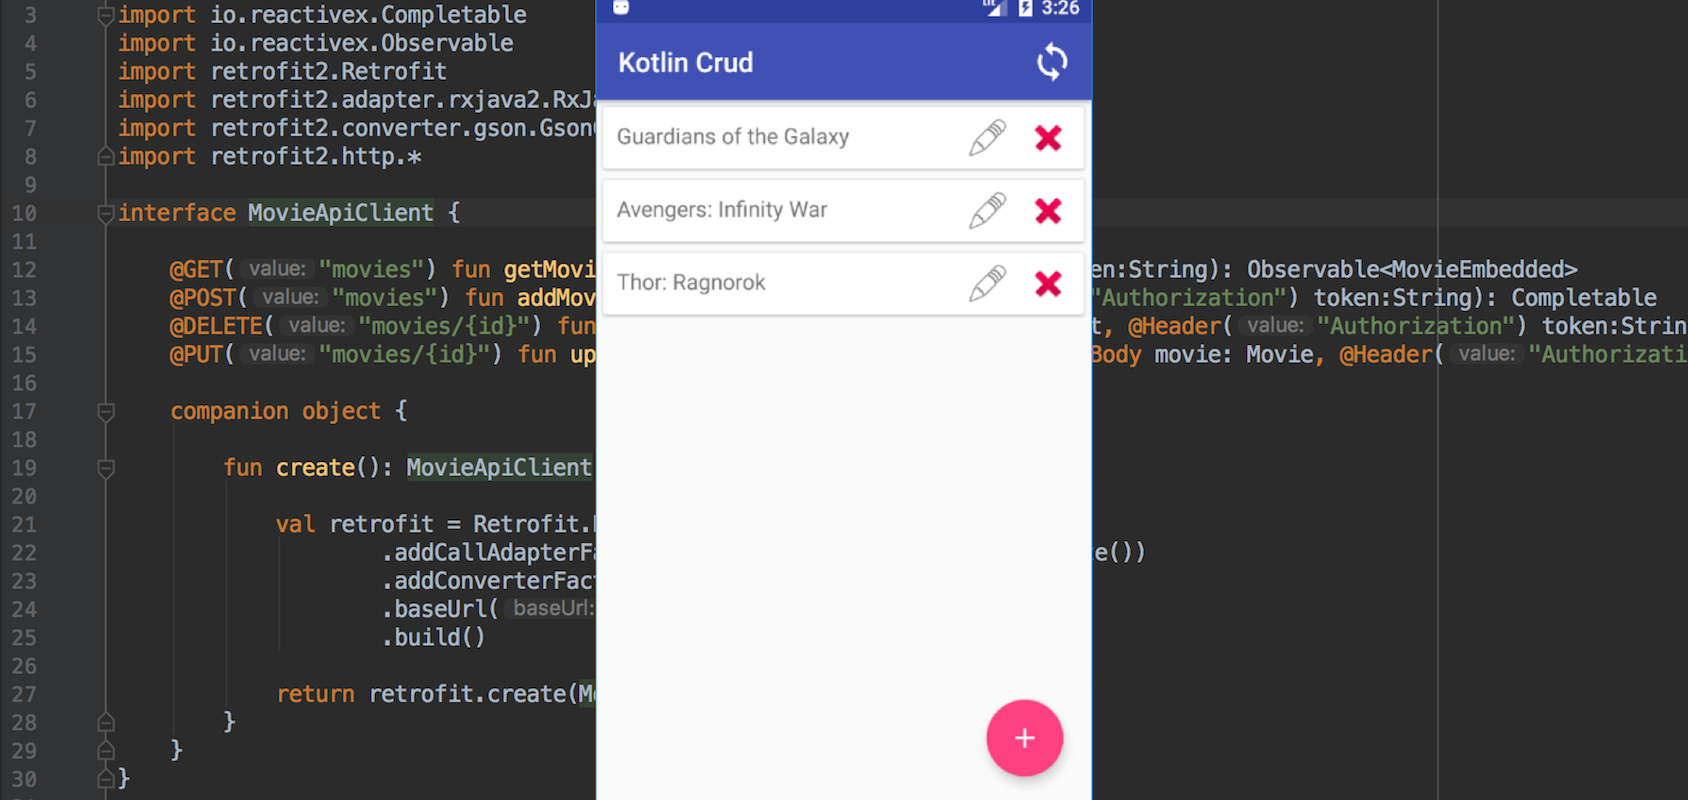 Build a Basic CRUD App in Android with Kotlin